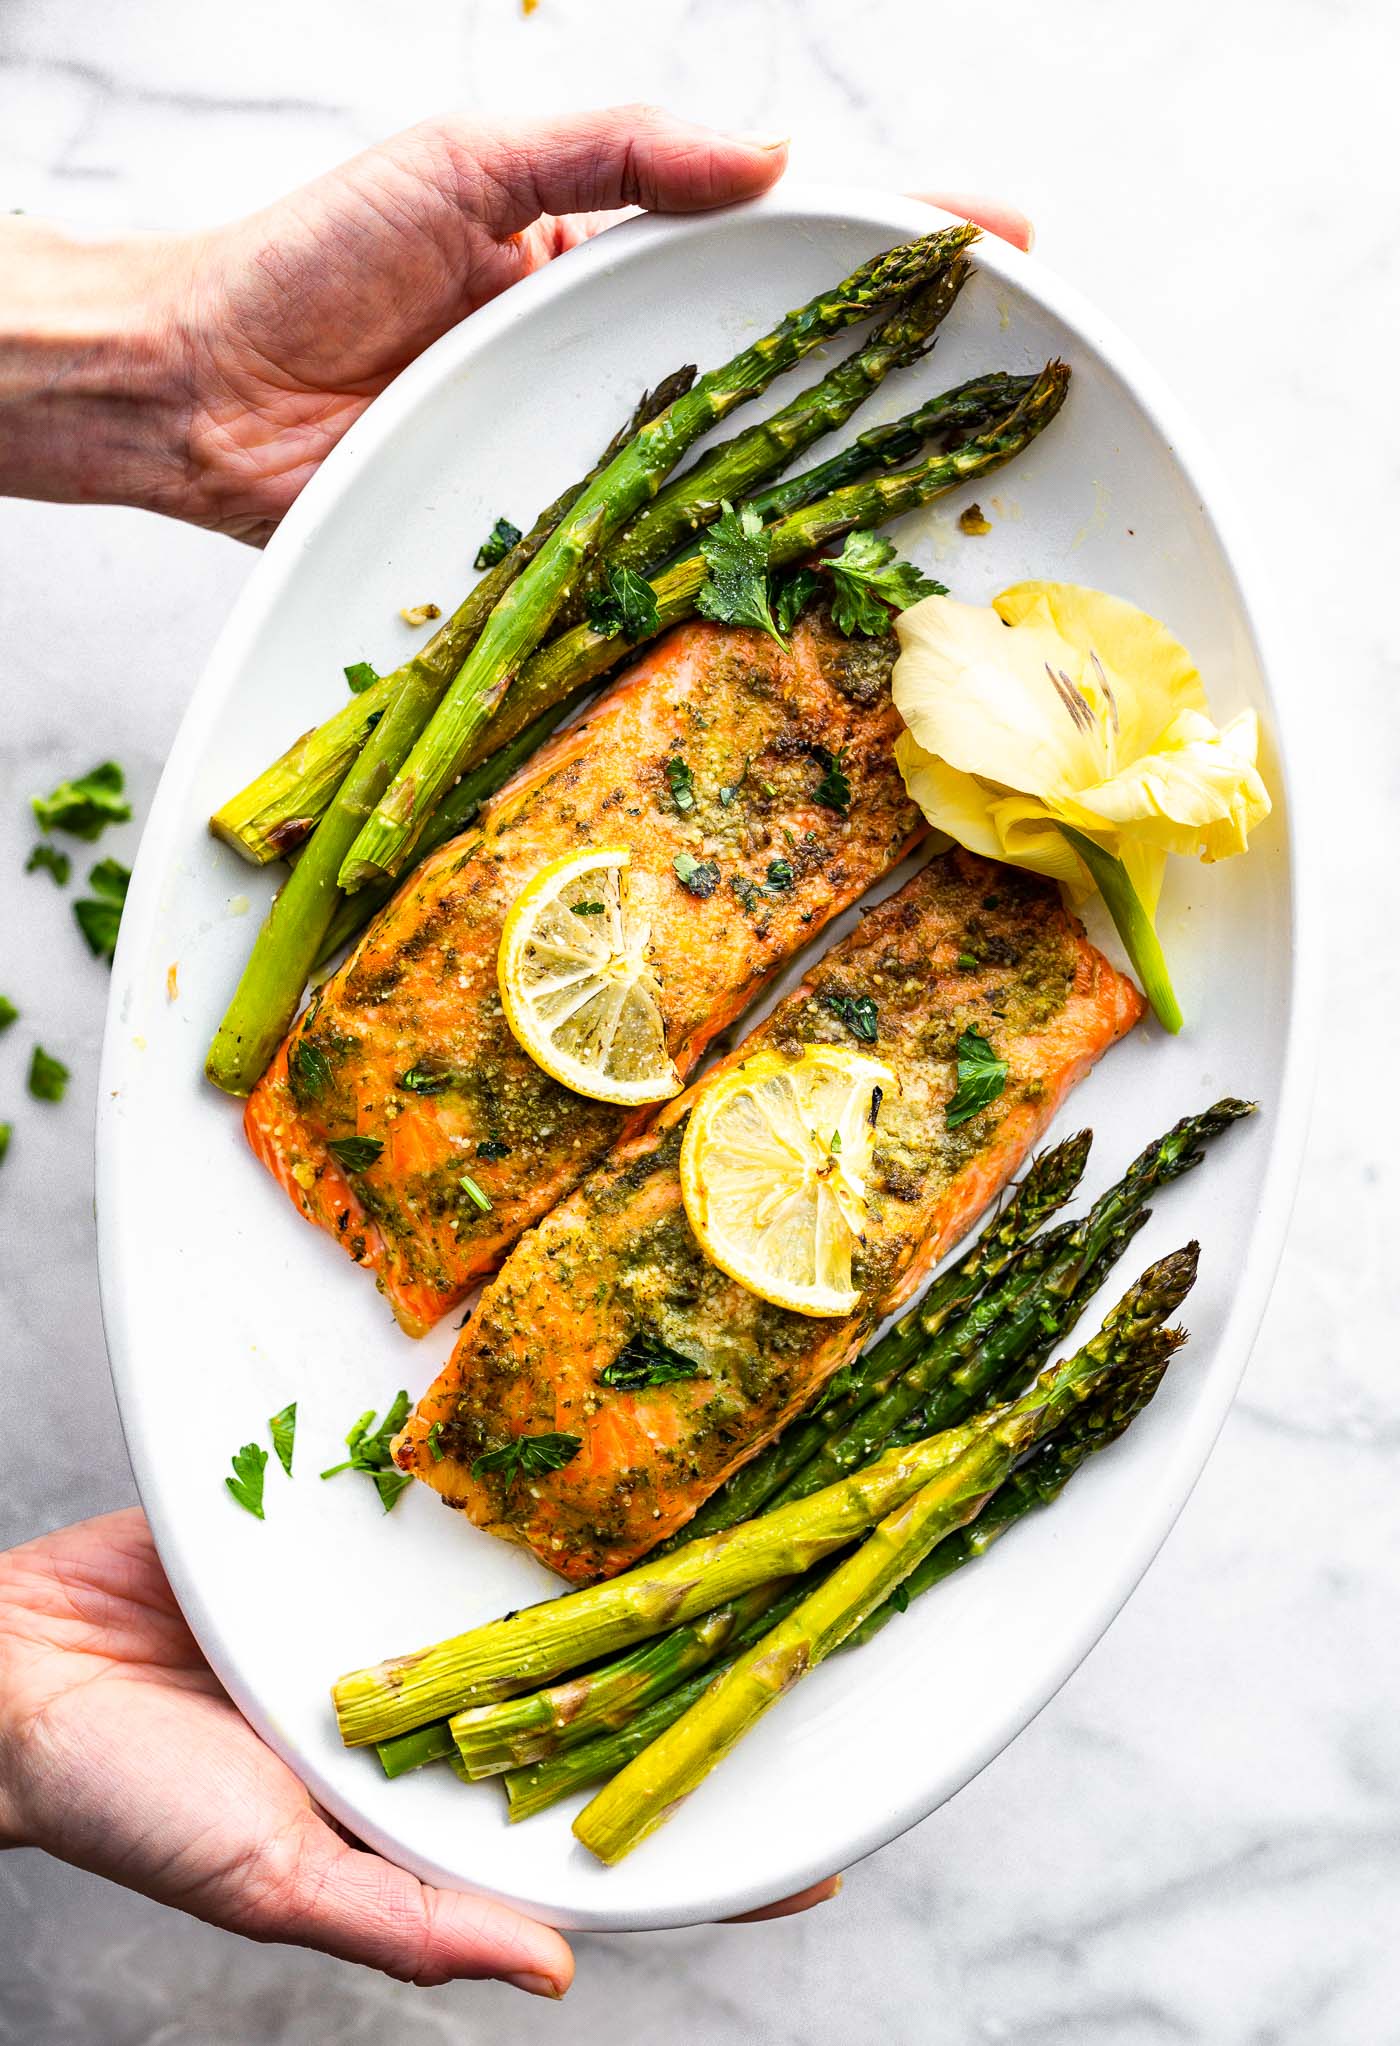 Two hands holding white platter with baked salmon filets and roasted asparagus spears, flower on the side.